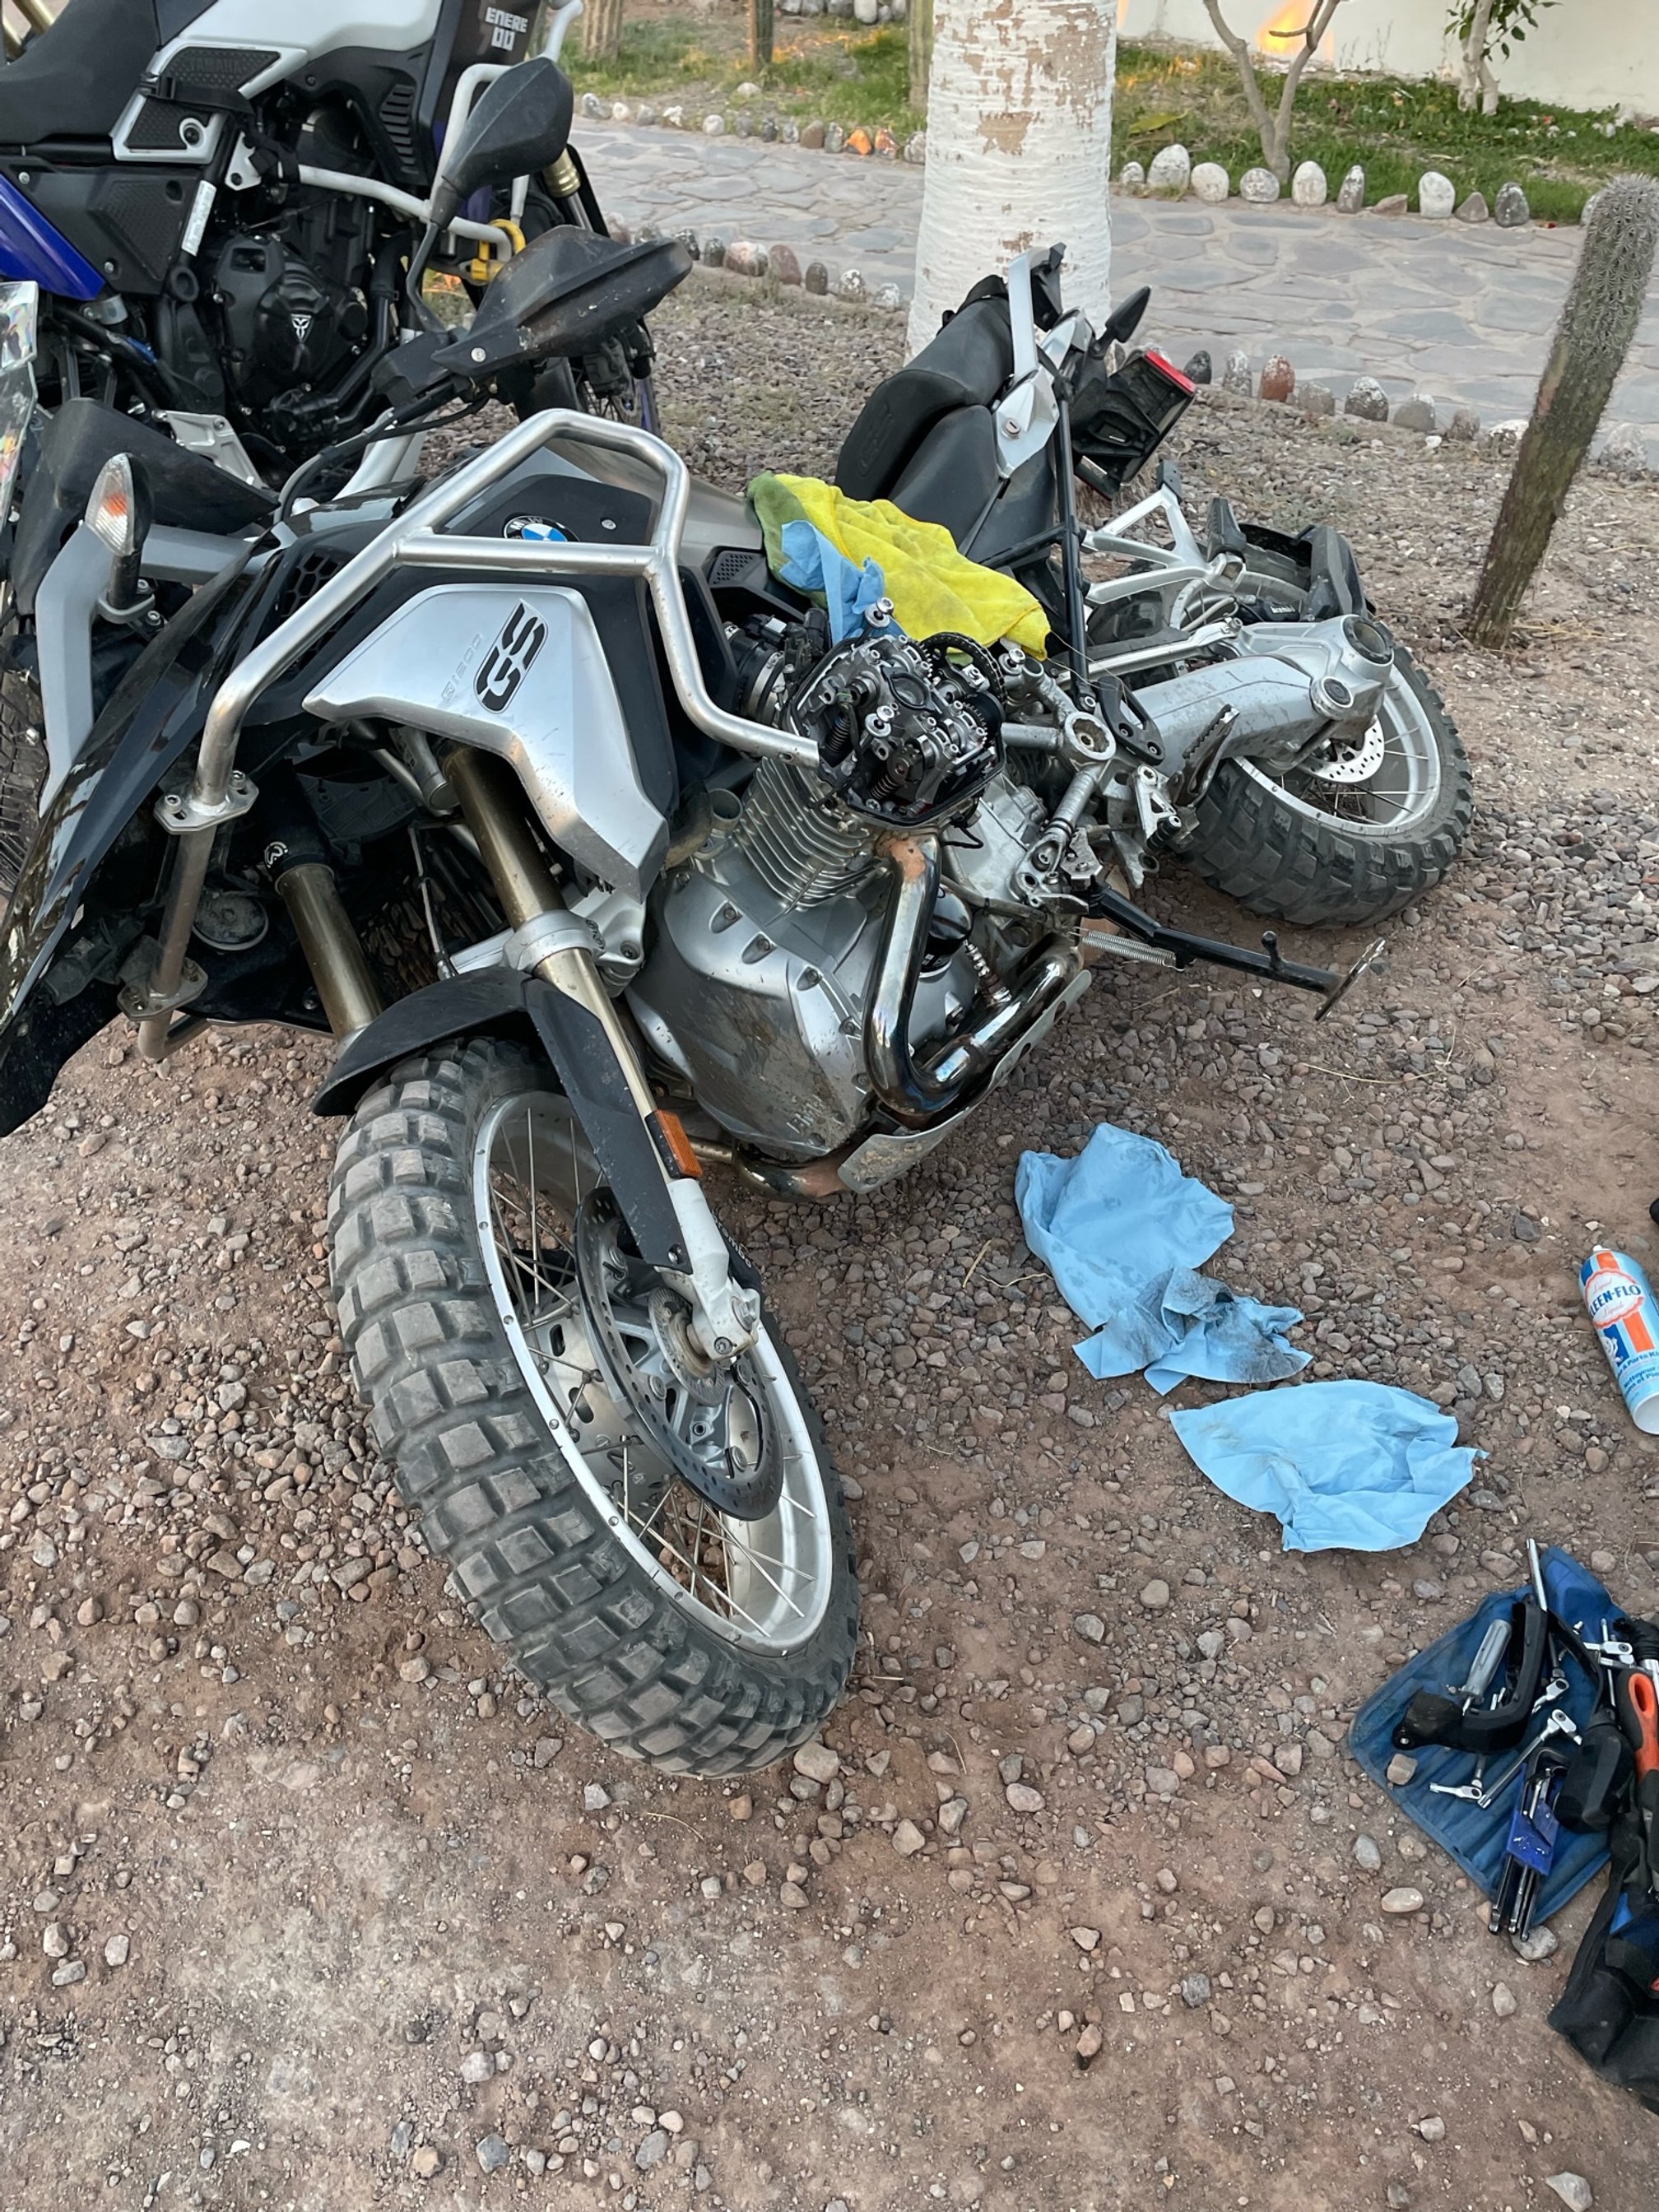 Motorcycle on ground being repaired